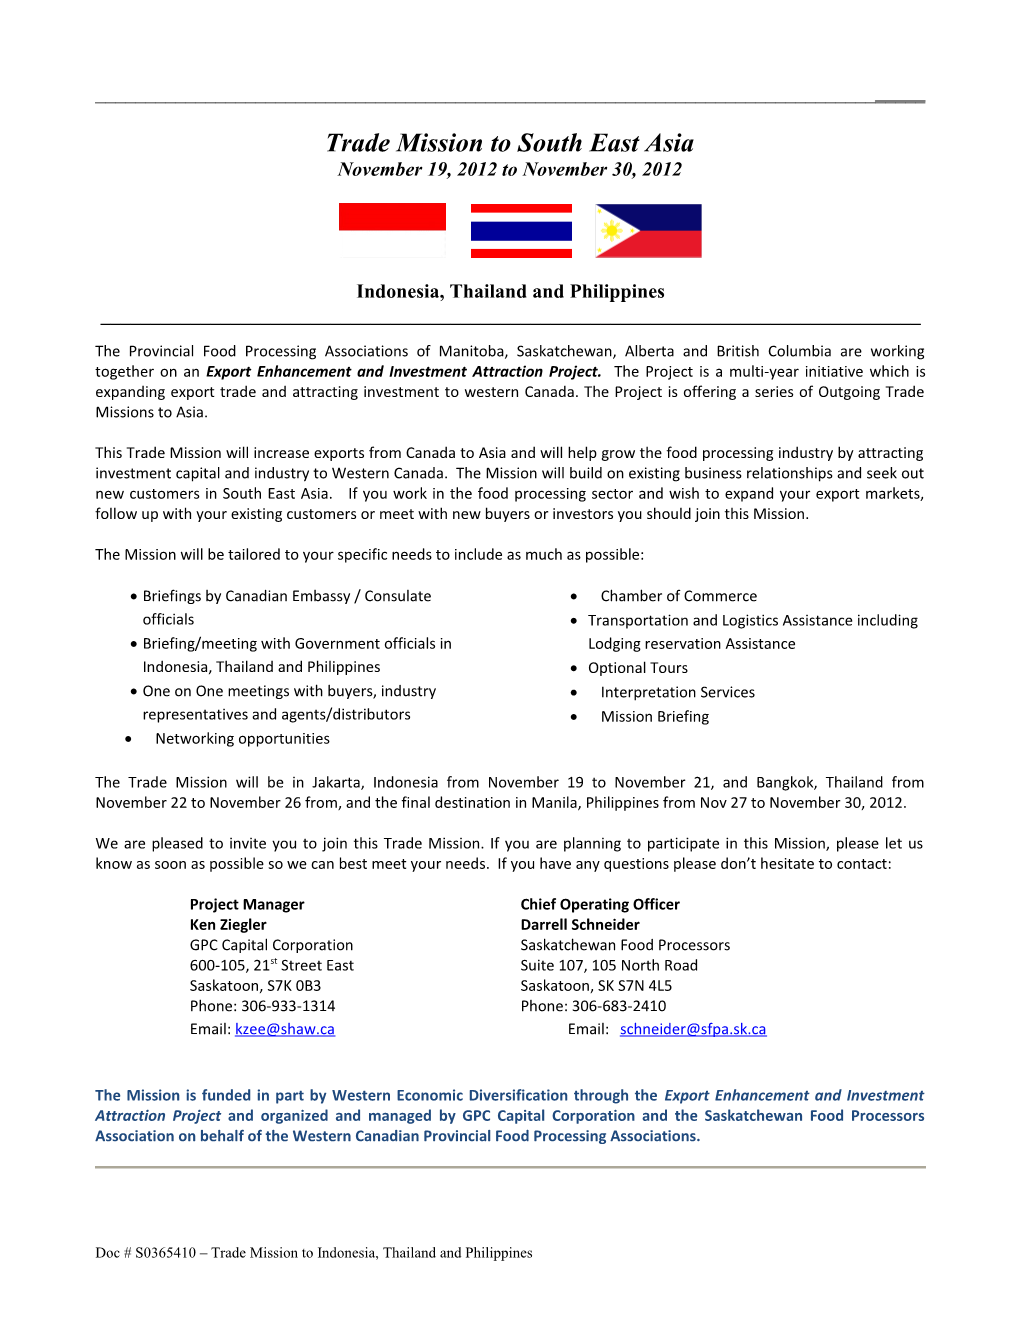 Trade Mission to Indonesia, Thailand and Philippines (S0365410)